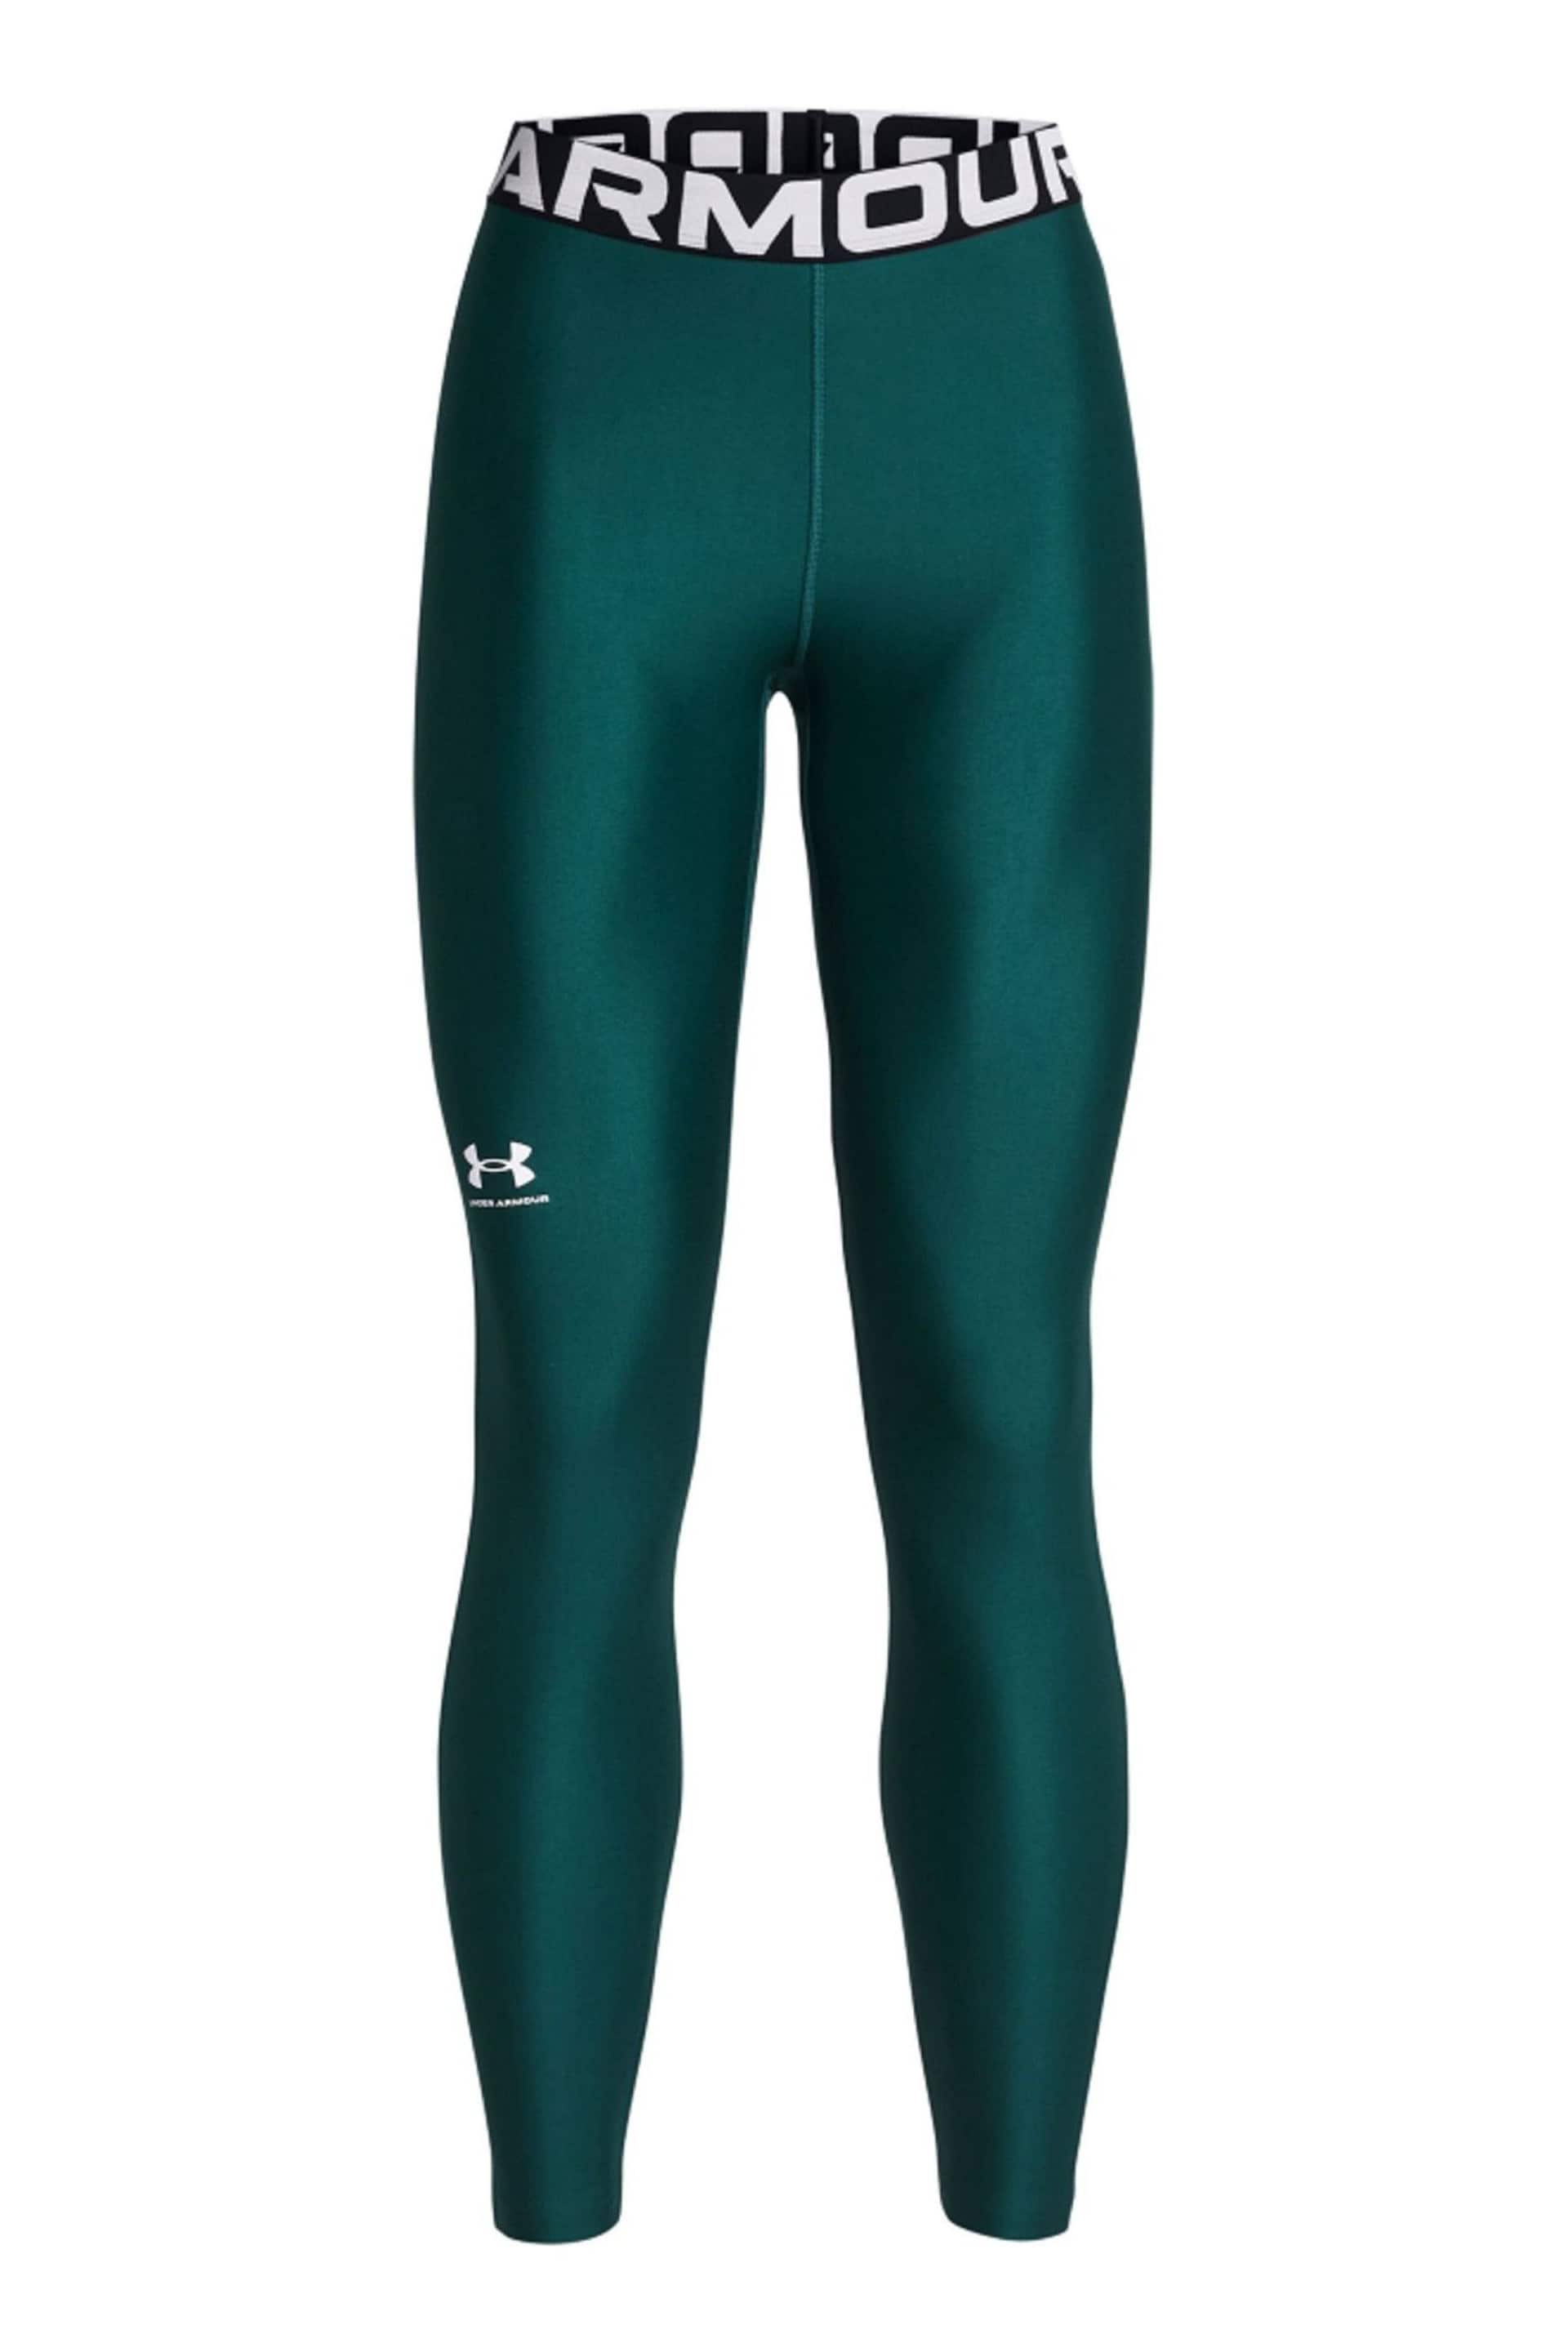 Under Armour Green Womens Heat Gear Authentics Leggings - Image 7 of 8